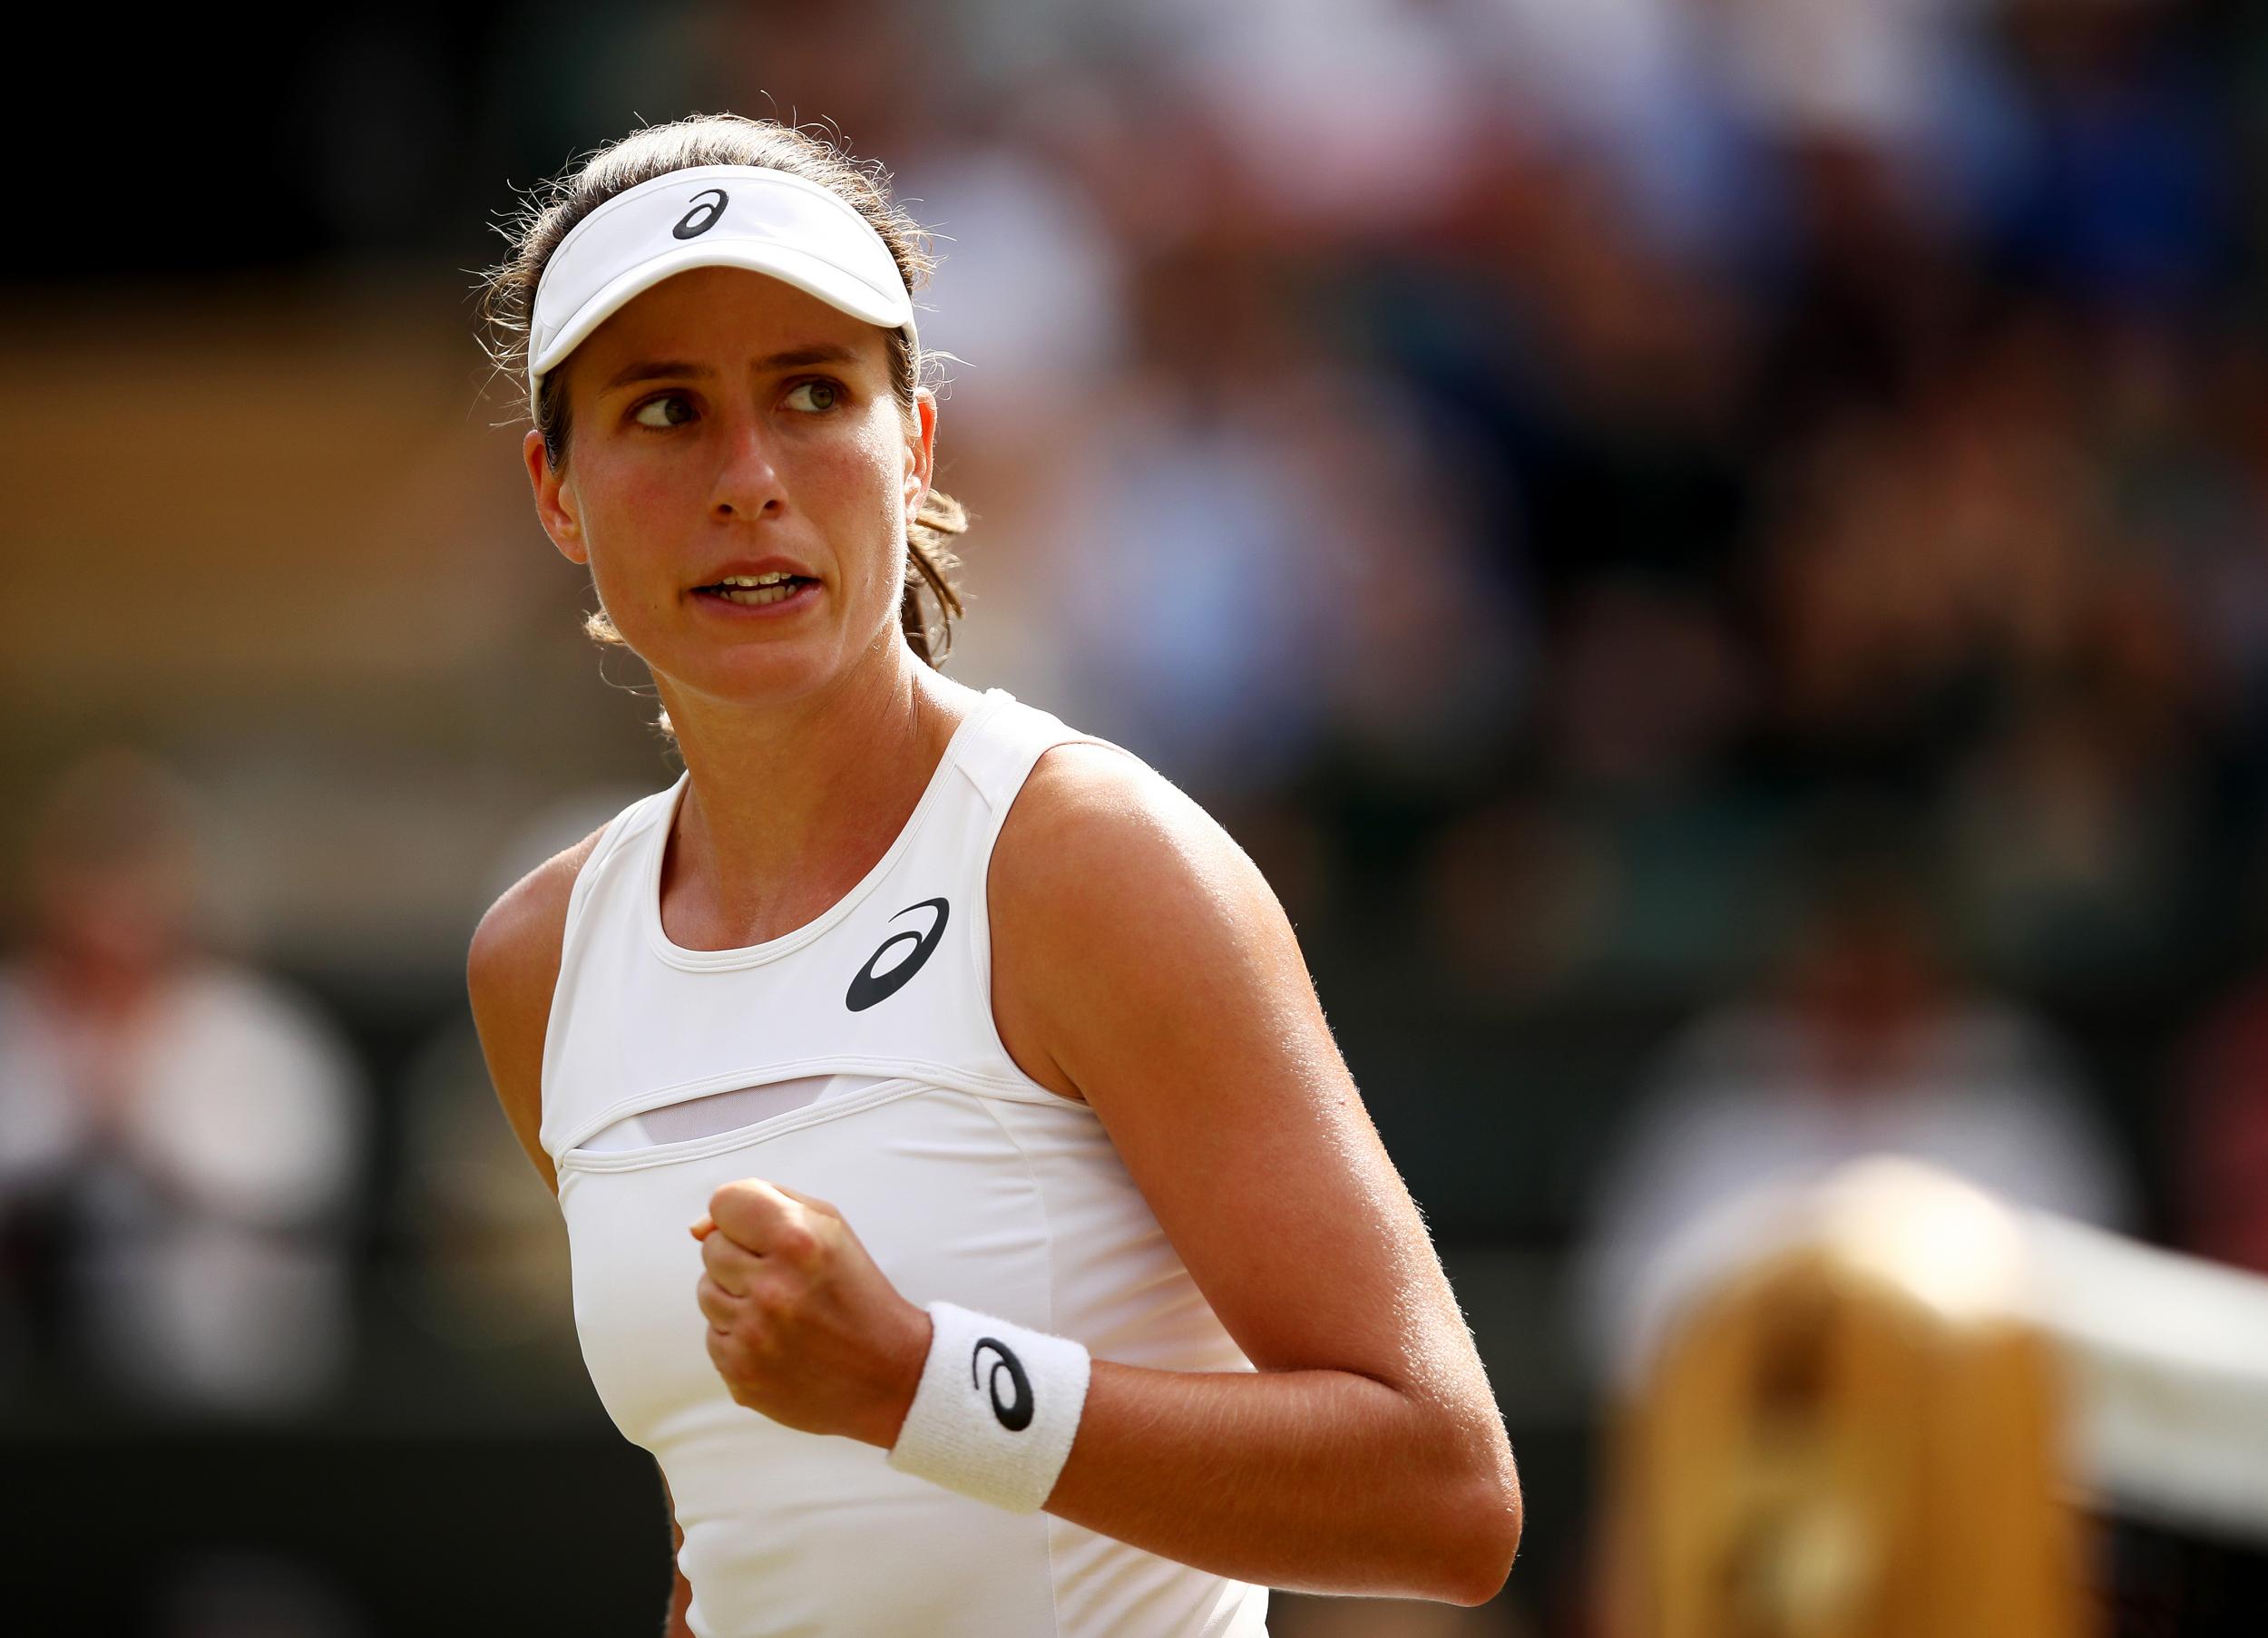 Konta has made it into the second week of Wimbledon